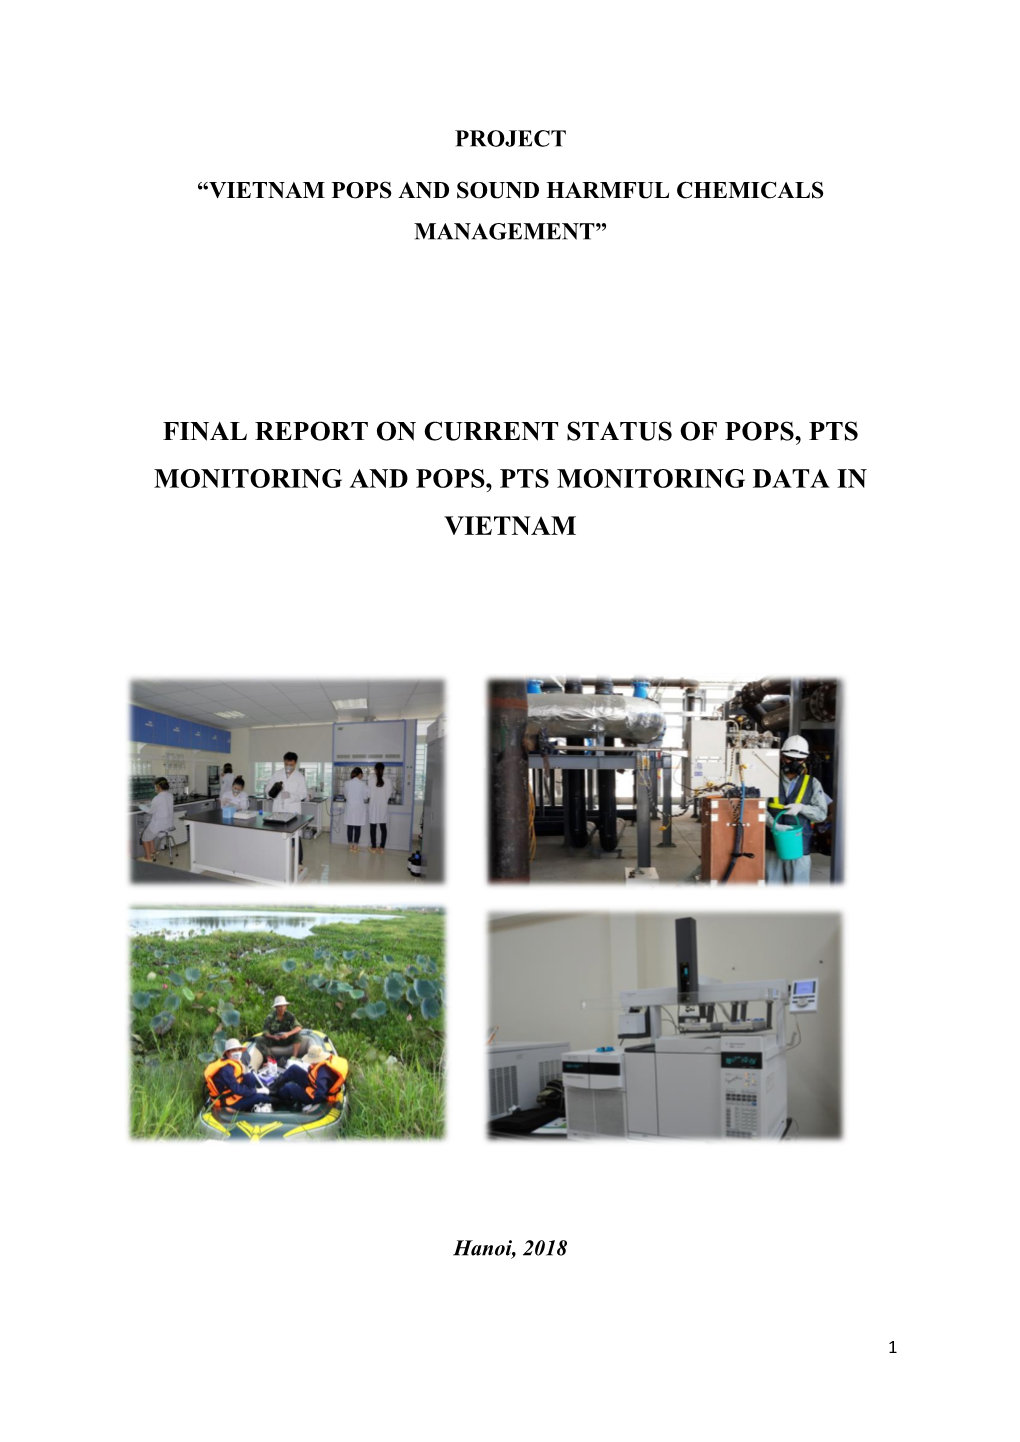 Final Report on Current Status of Pops, Pts Monitoring and Pops, Pts Monitoring Data in Vietnam